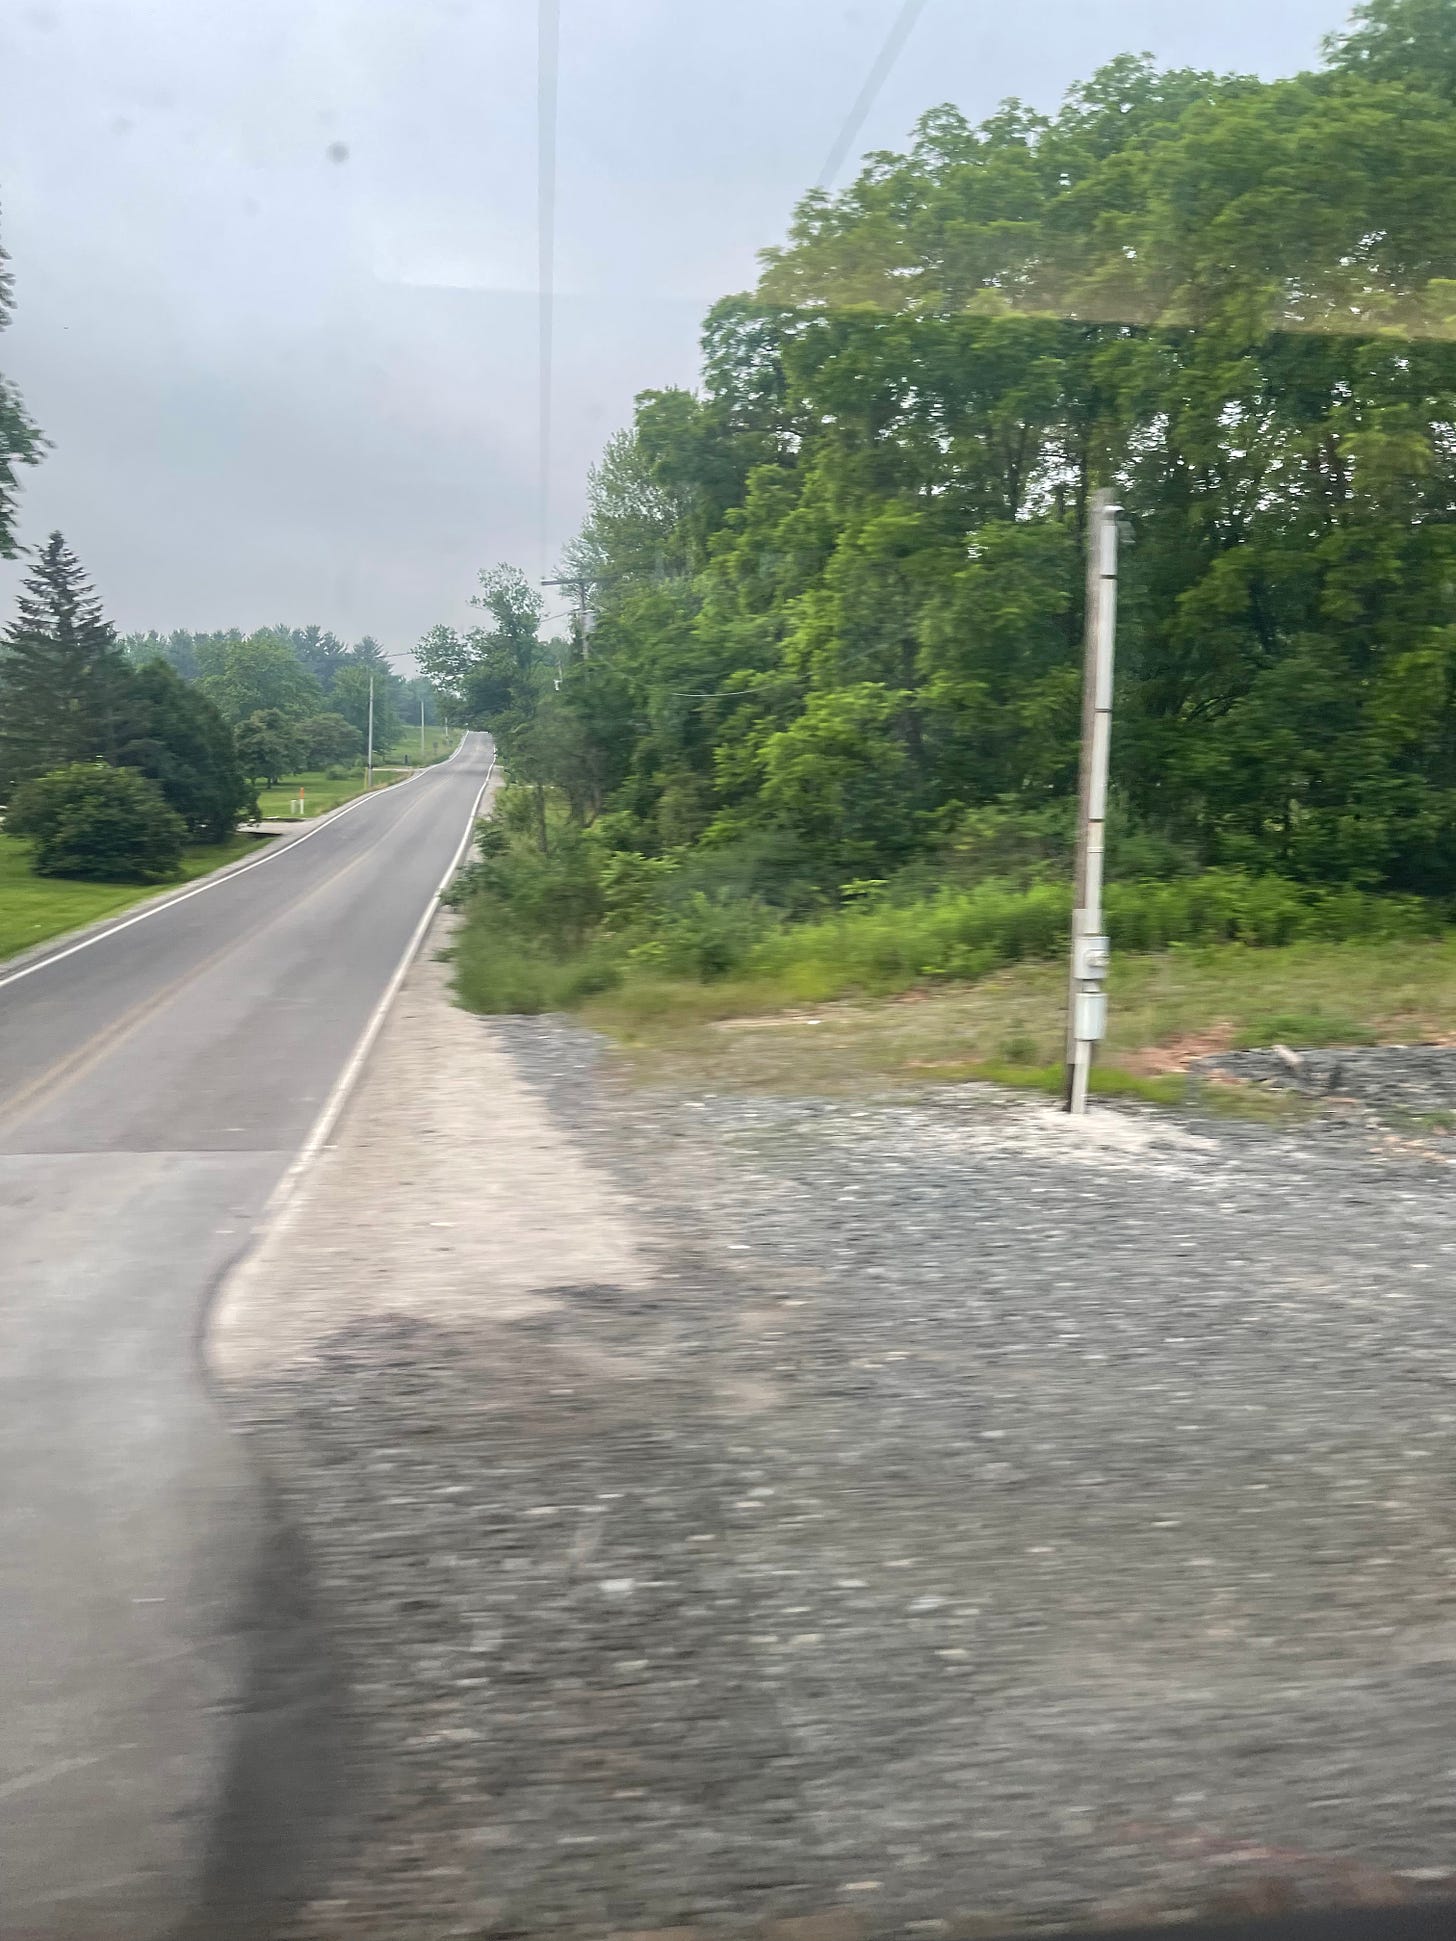 a view from inside a train, passing by a long paved country road with trees on either side